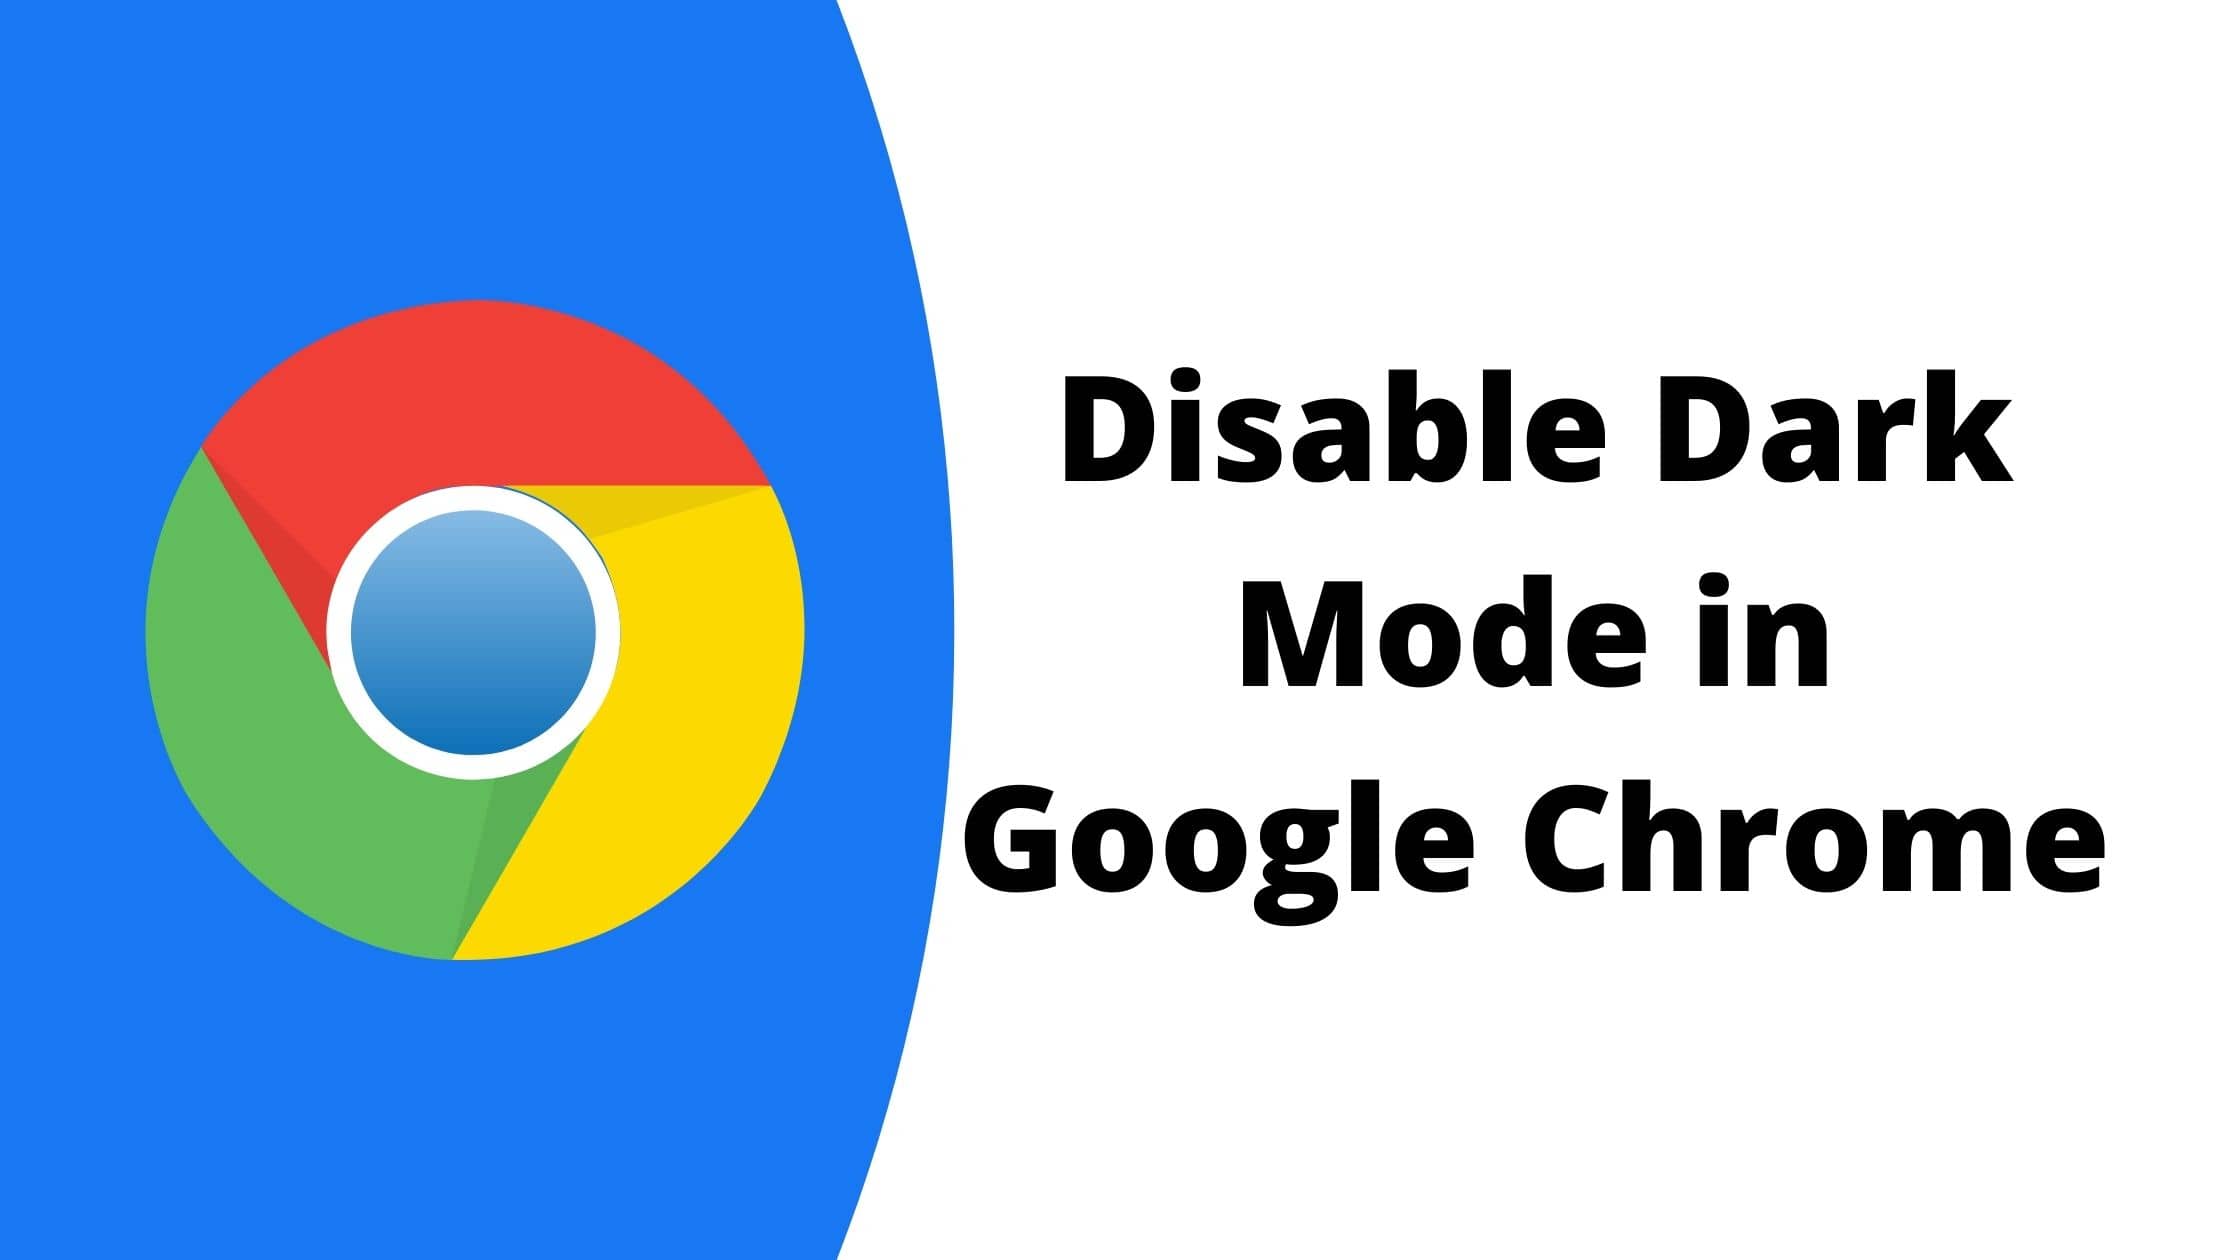 How to Disable Dark Mode in Google Chrome on Android, iOS, Windows